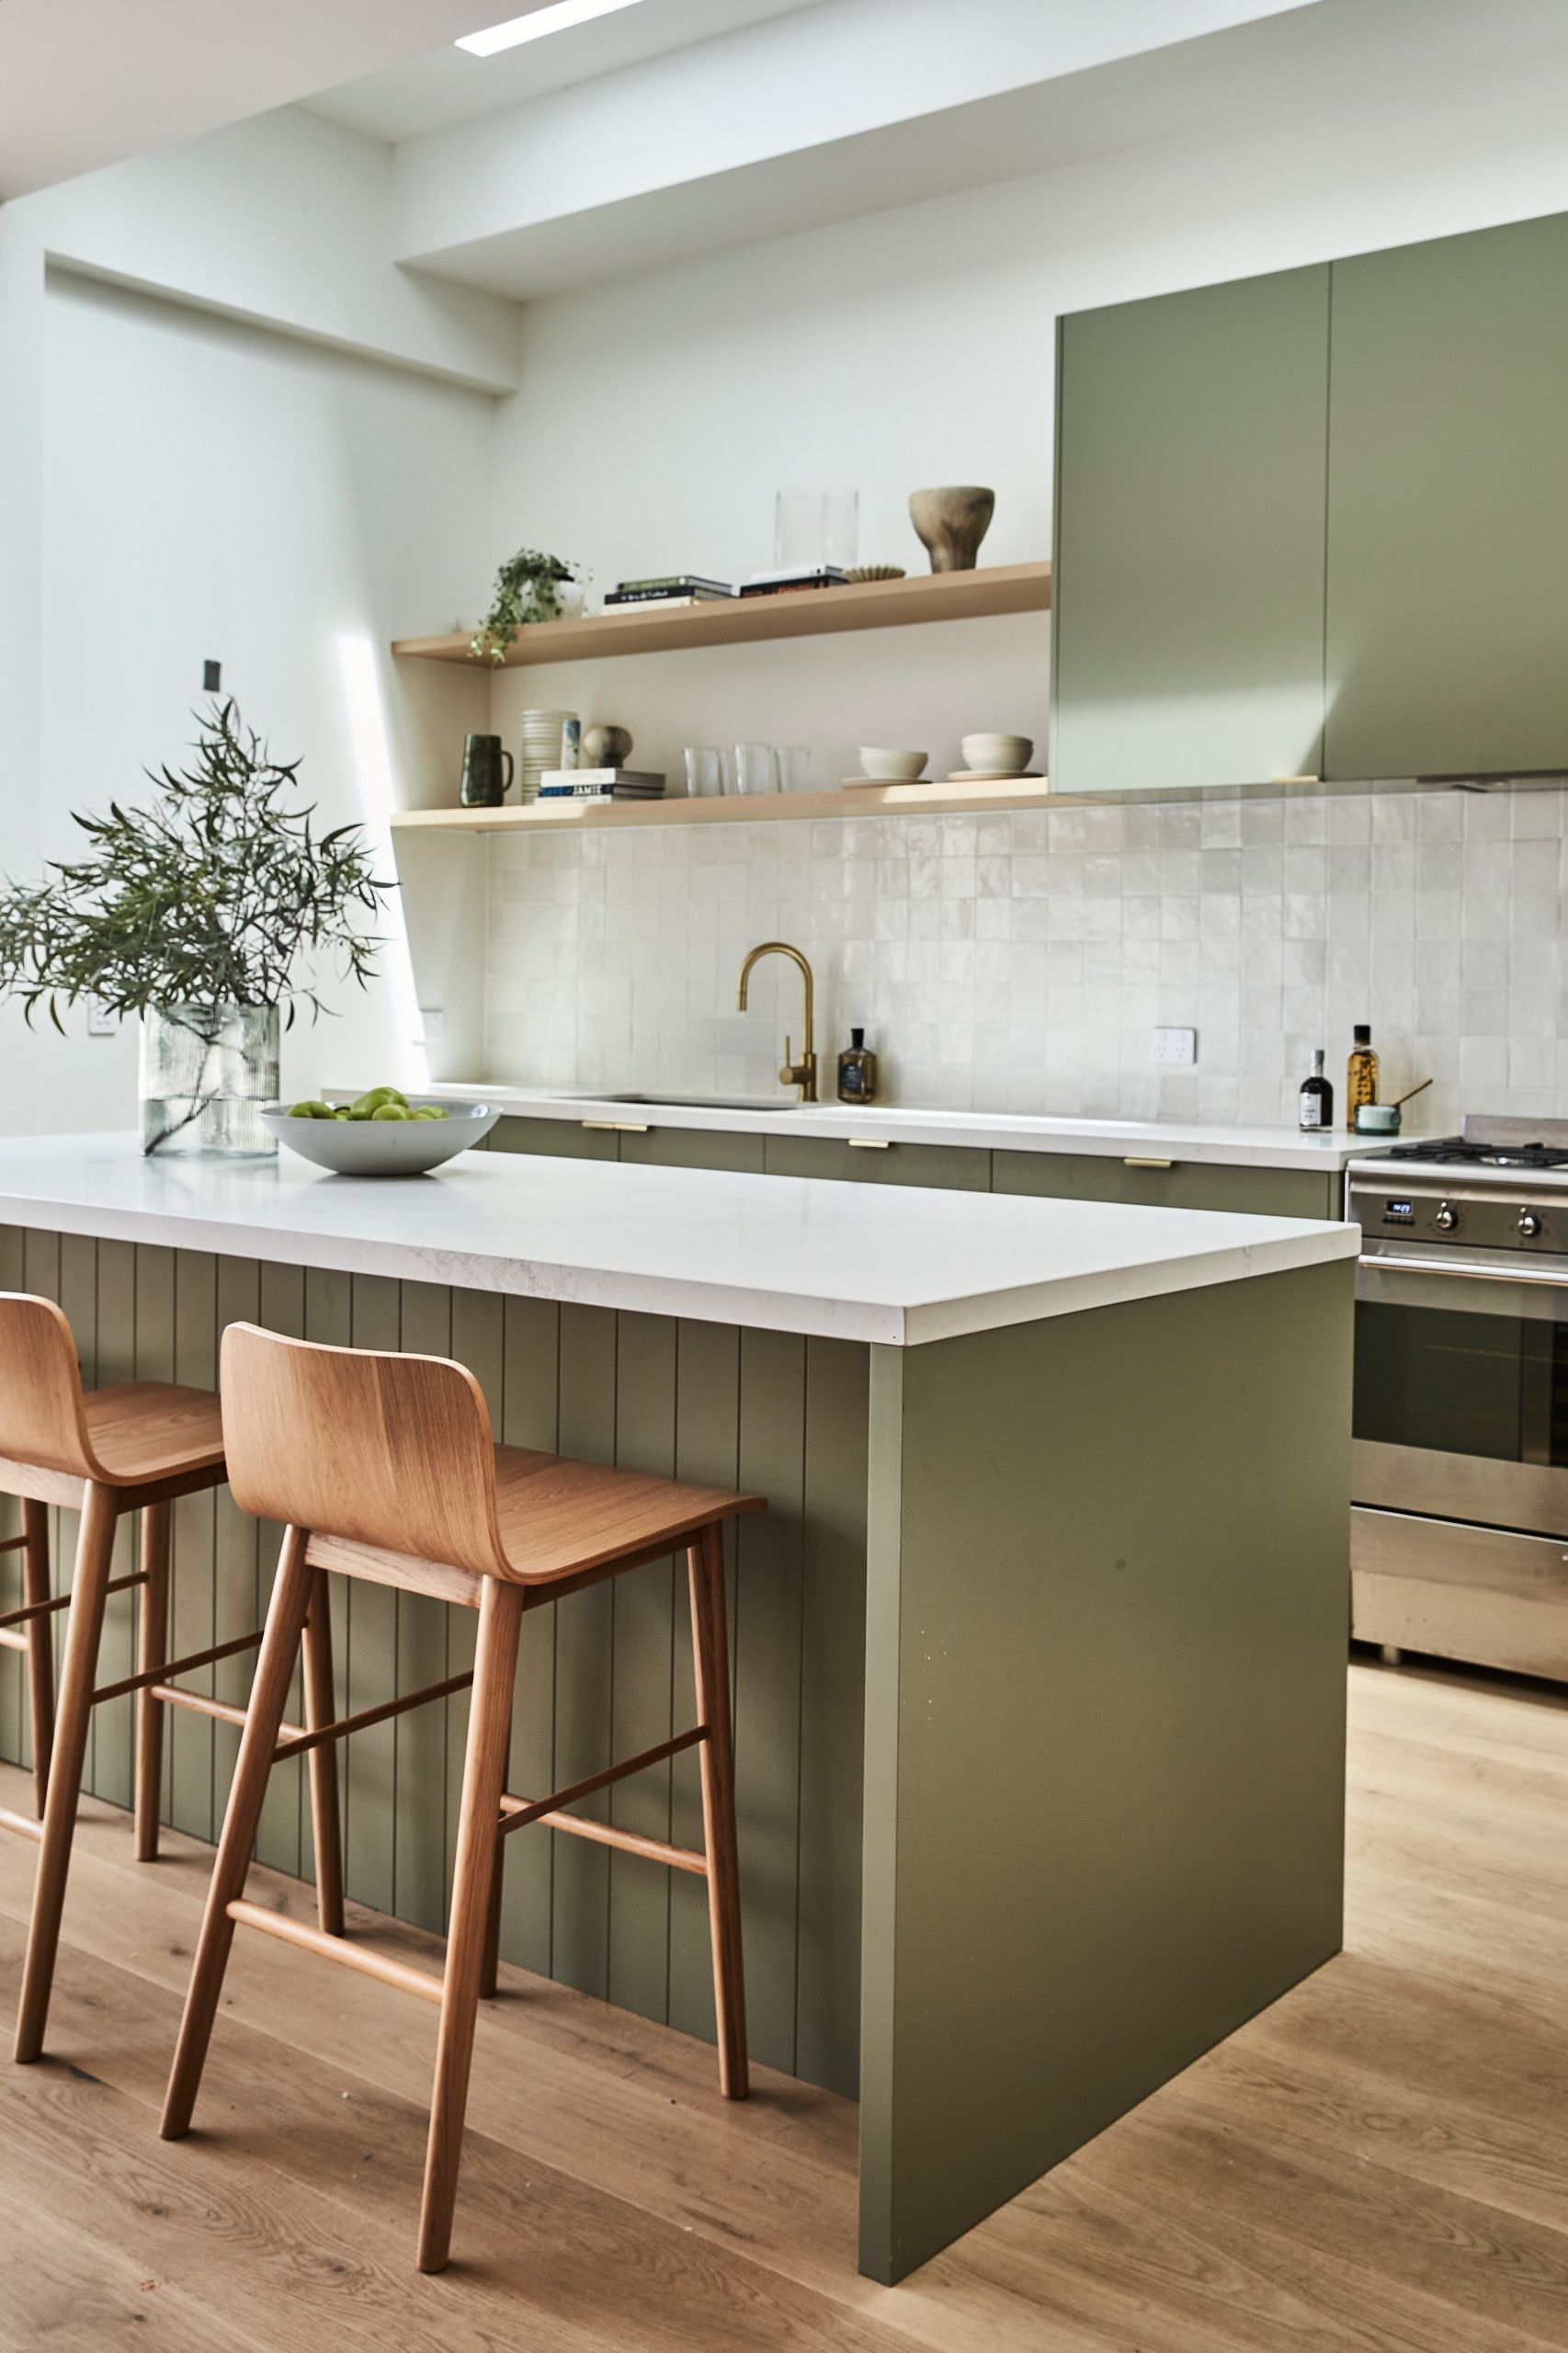 The Ecological Kitchen: Embracing Sustainability with Green Design